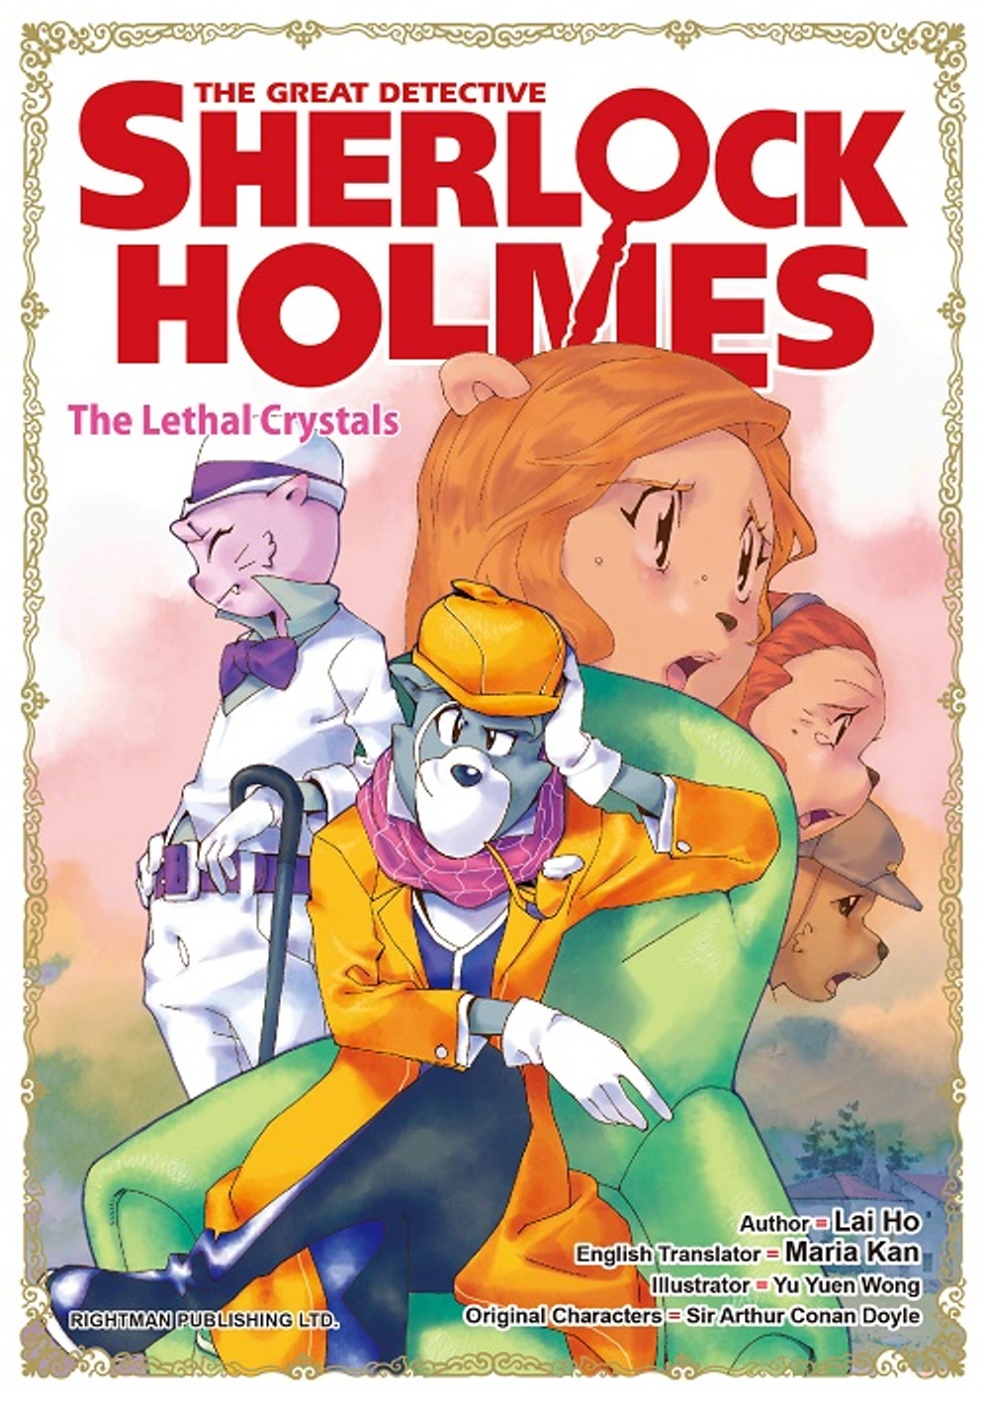 THE GREAT DETECTIVE SHERLOCK HOLMES(11) The Lethal Crystals